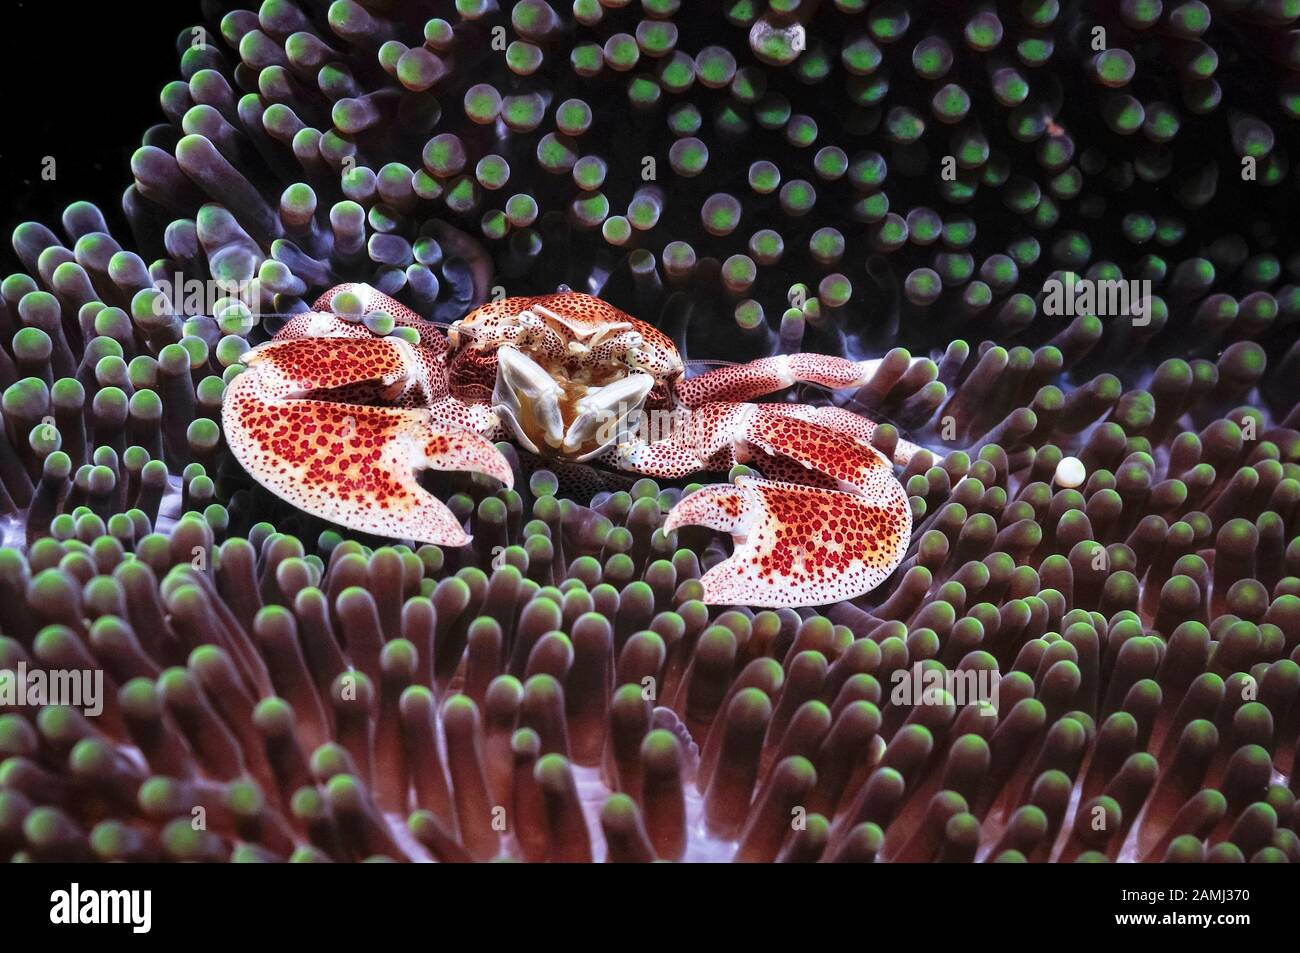 red-spotted porcelain crab, Neopetrolisthes oshimai, Komodo National Park, Indonesia, Flores Sea, Indian Ocean Stock Photo